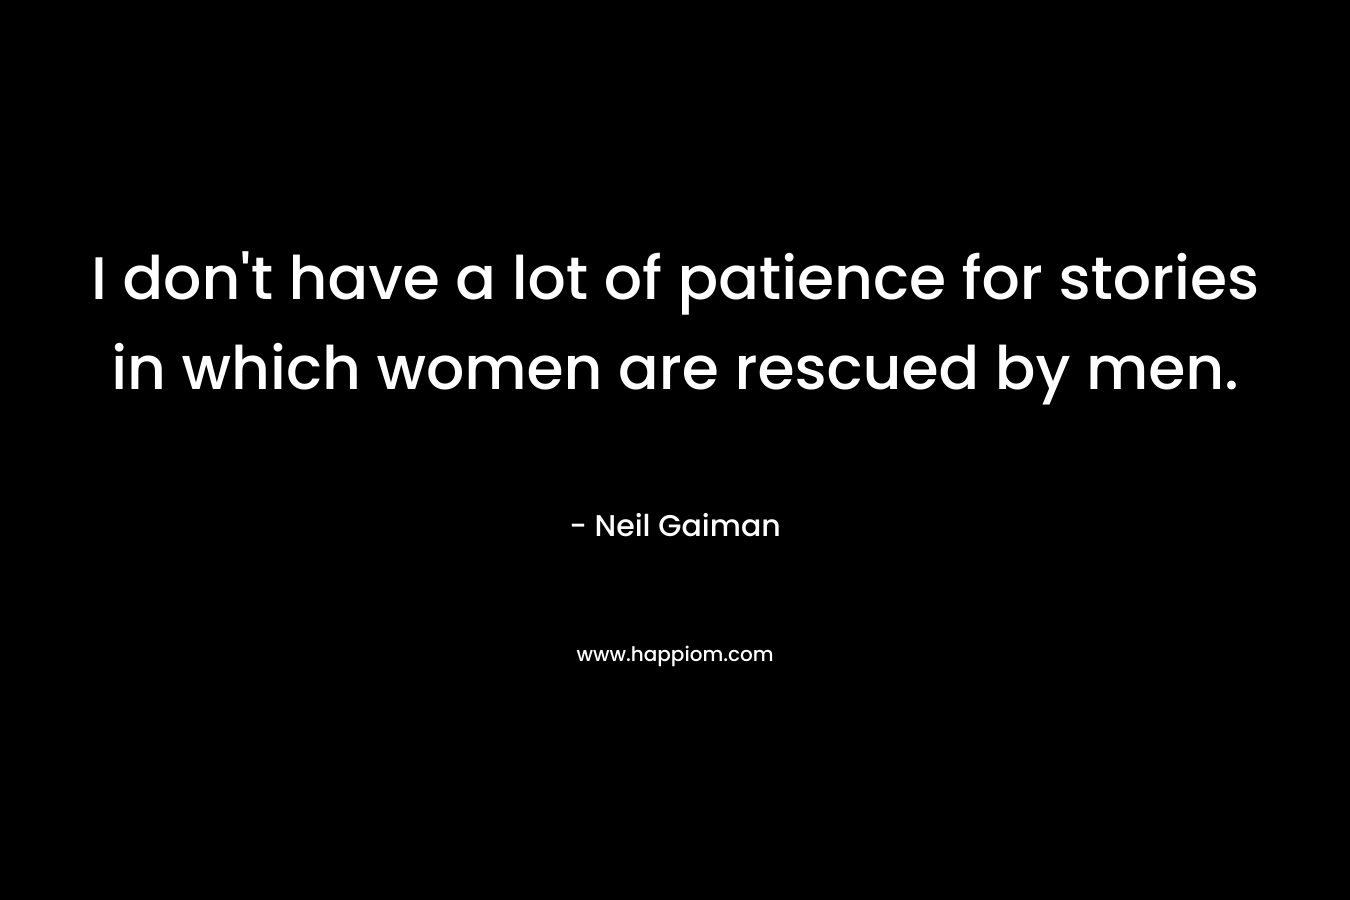 I don’t have a lot of patience for stories in which women are rescued by men. – Neil Gaiman